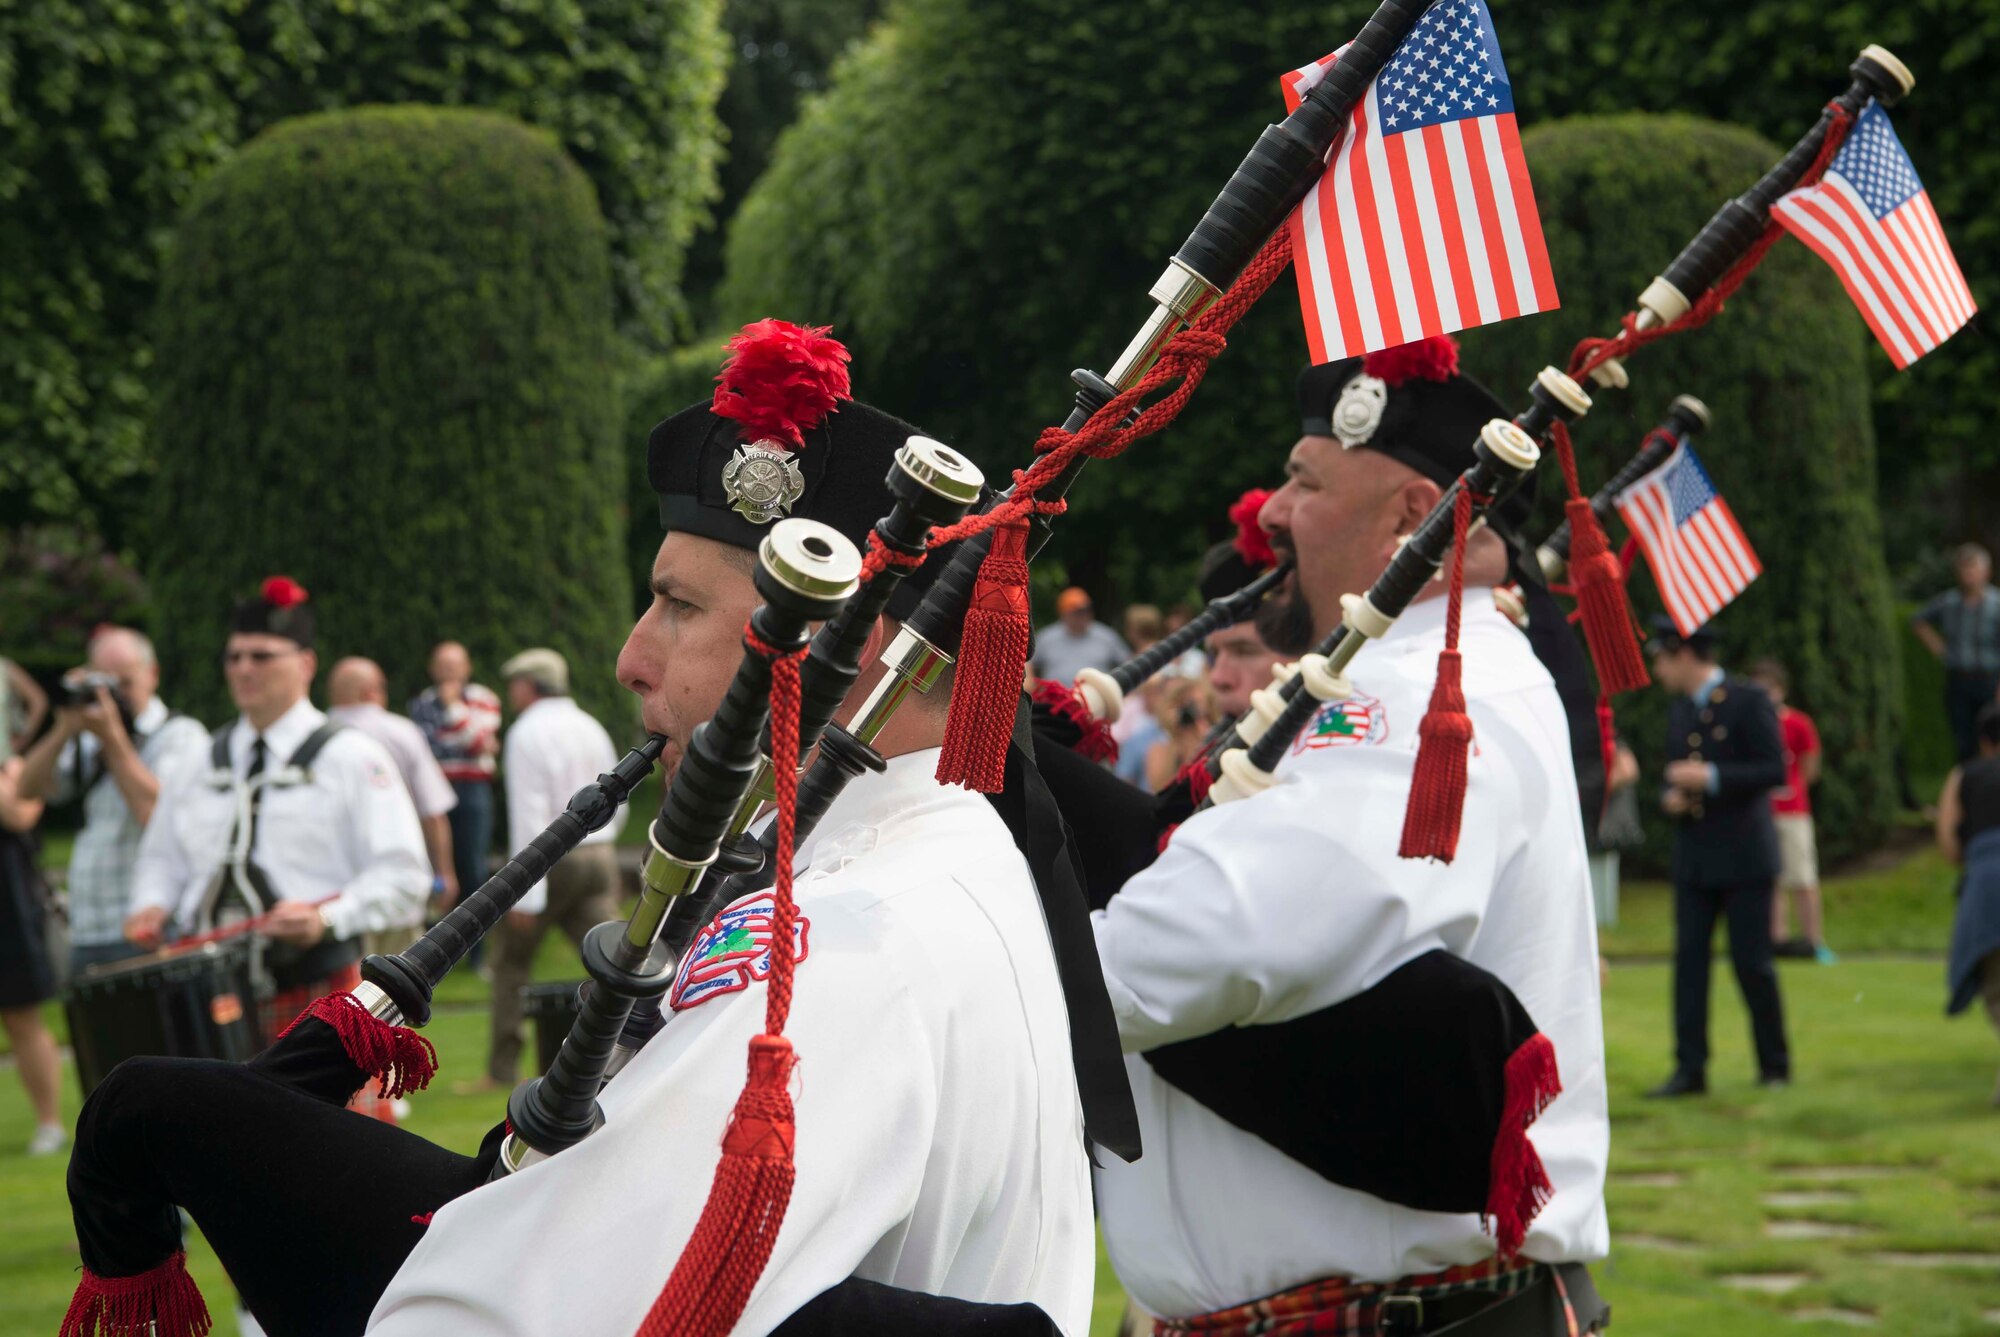 Nassau County firefighters from New York perform during a Memorial Day ceremony at Flanders Field American Cemetery, Belgium, May 27, 2018. This year marks the 100th anniversary since the end of World War I, Nov. 11, 1918. (U.S. Air Force photo by Senior Airman Elizabeth Baker)